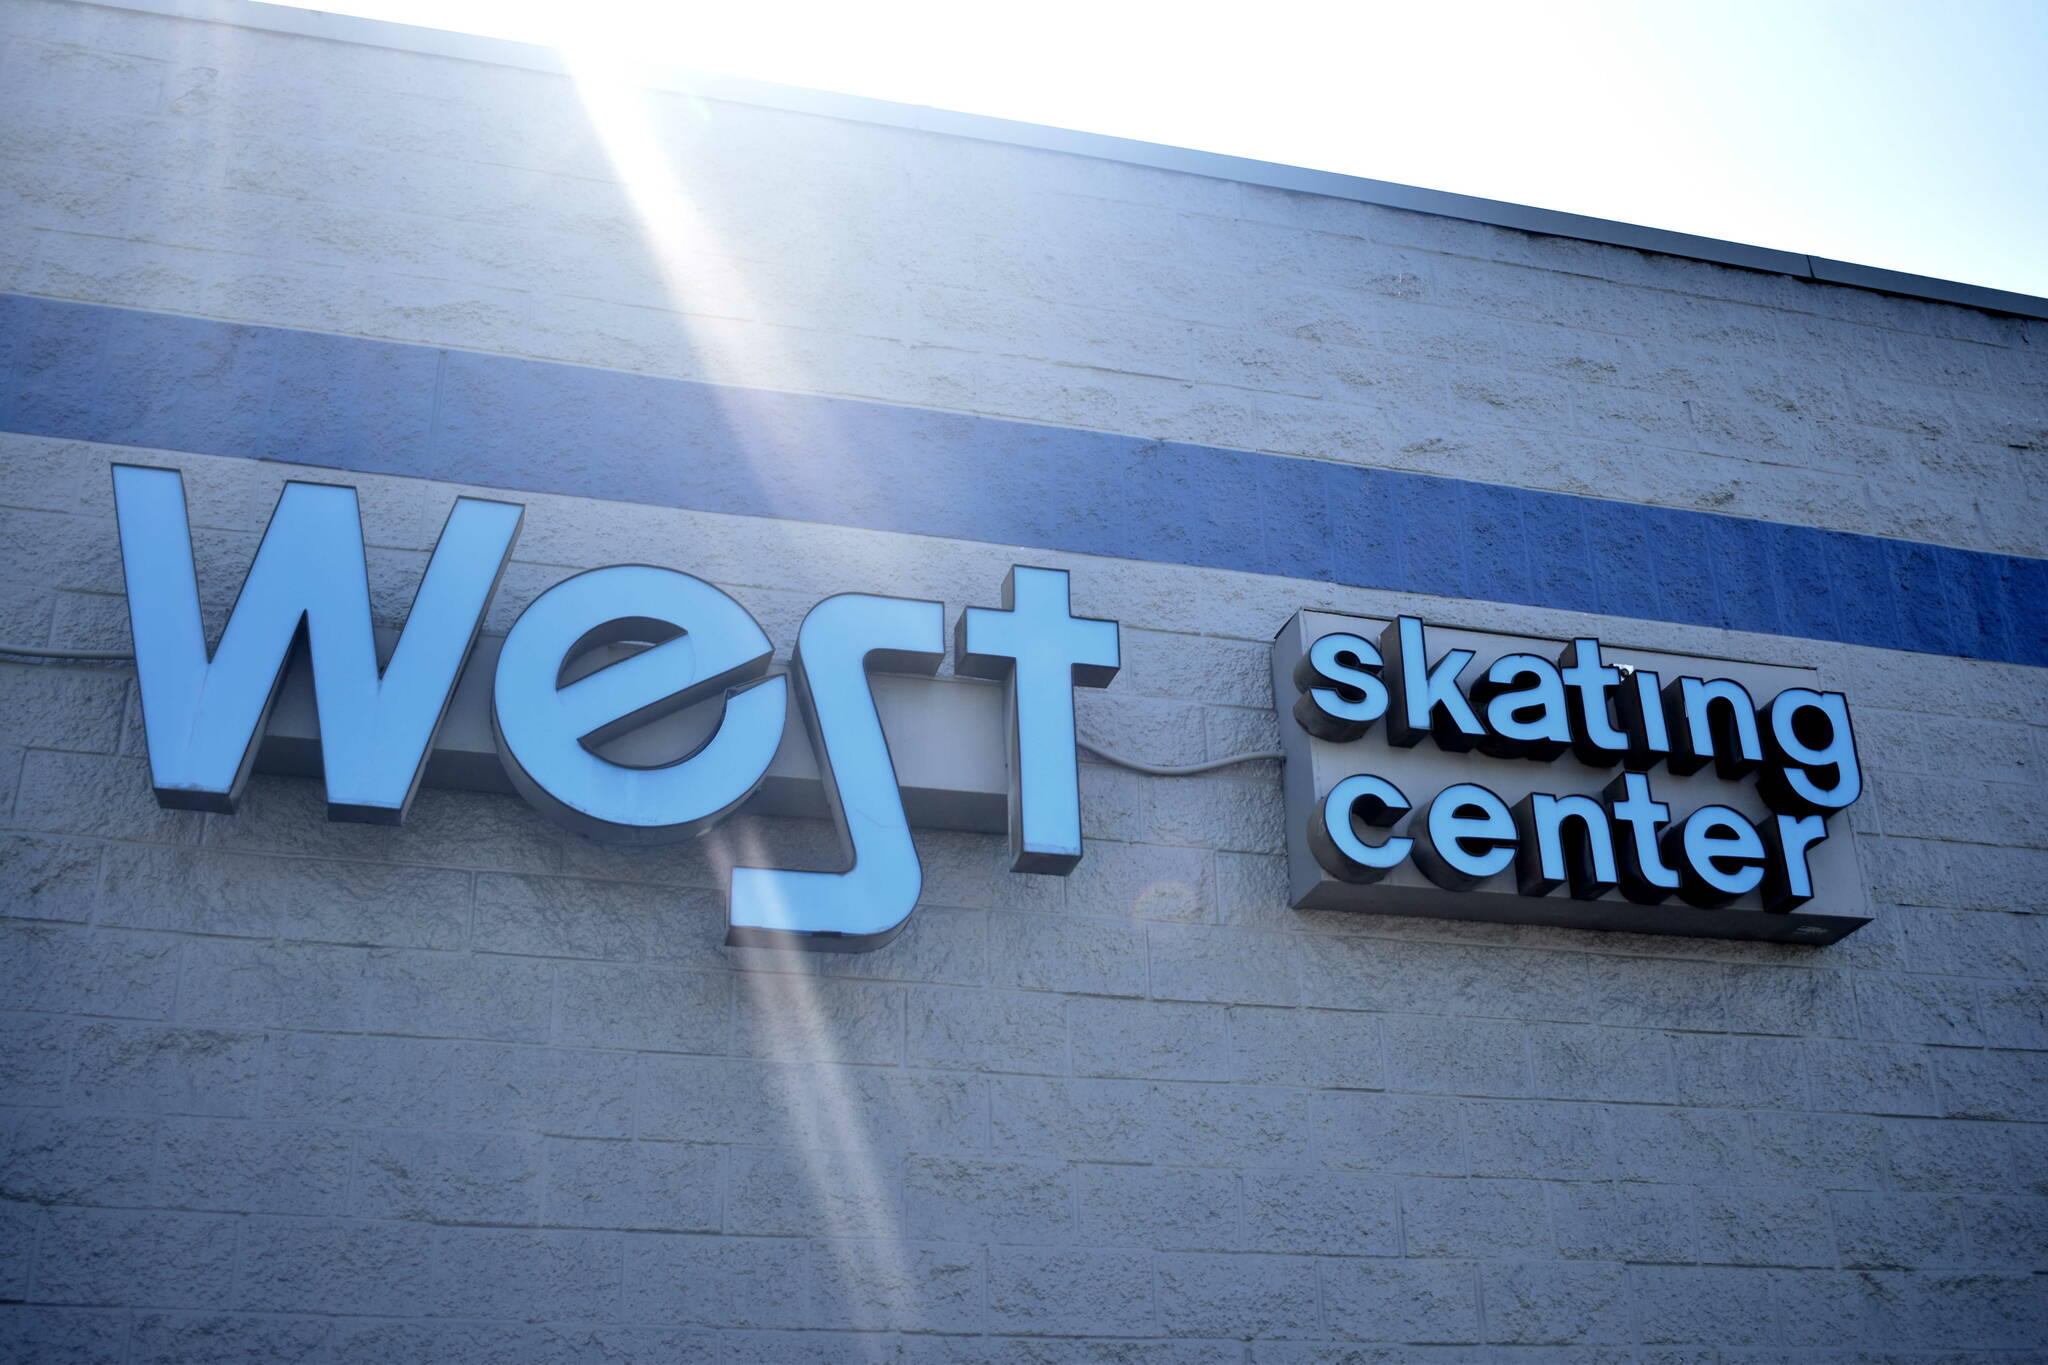 While the name “Pattison’s” may be going, it appears the skating center beloved by many Federal Way residents will be sticking around for years to come. Alex Bruell/Sound Publishing